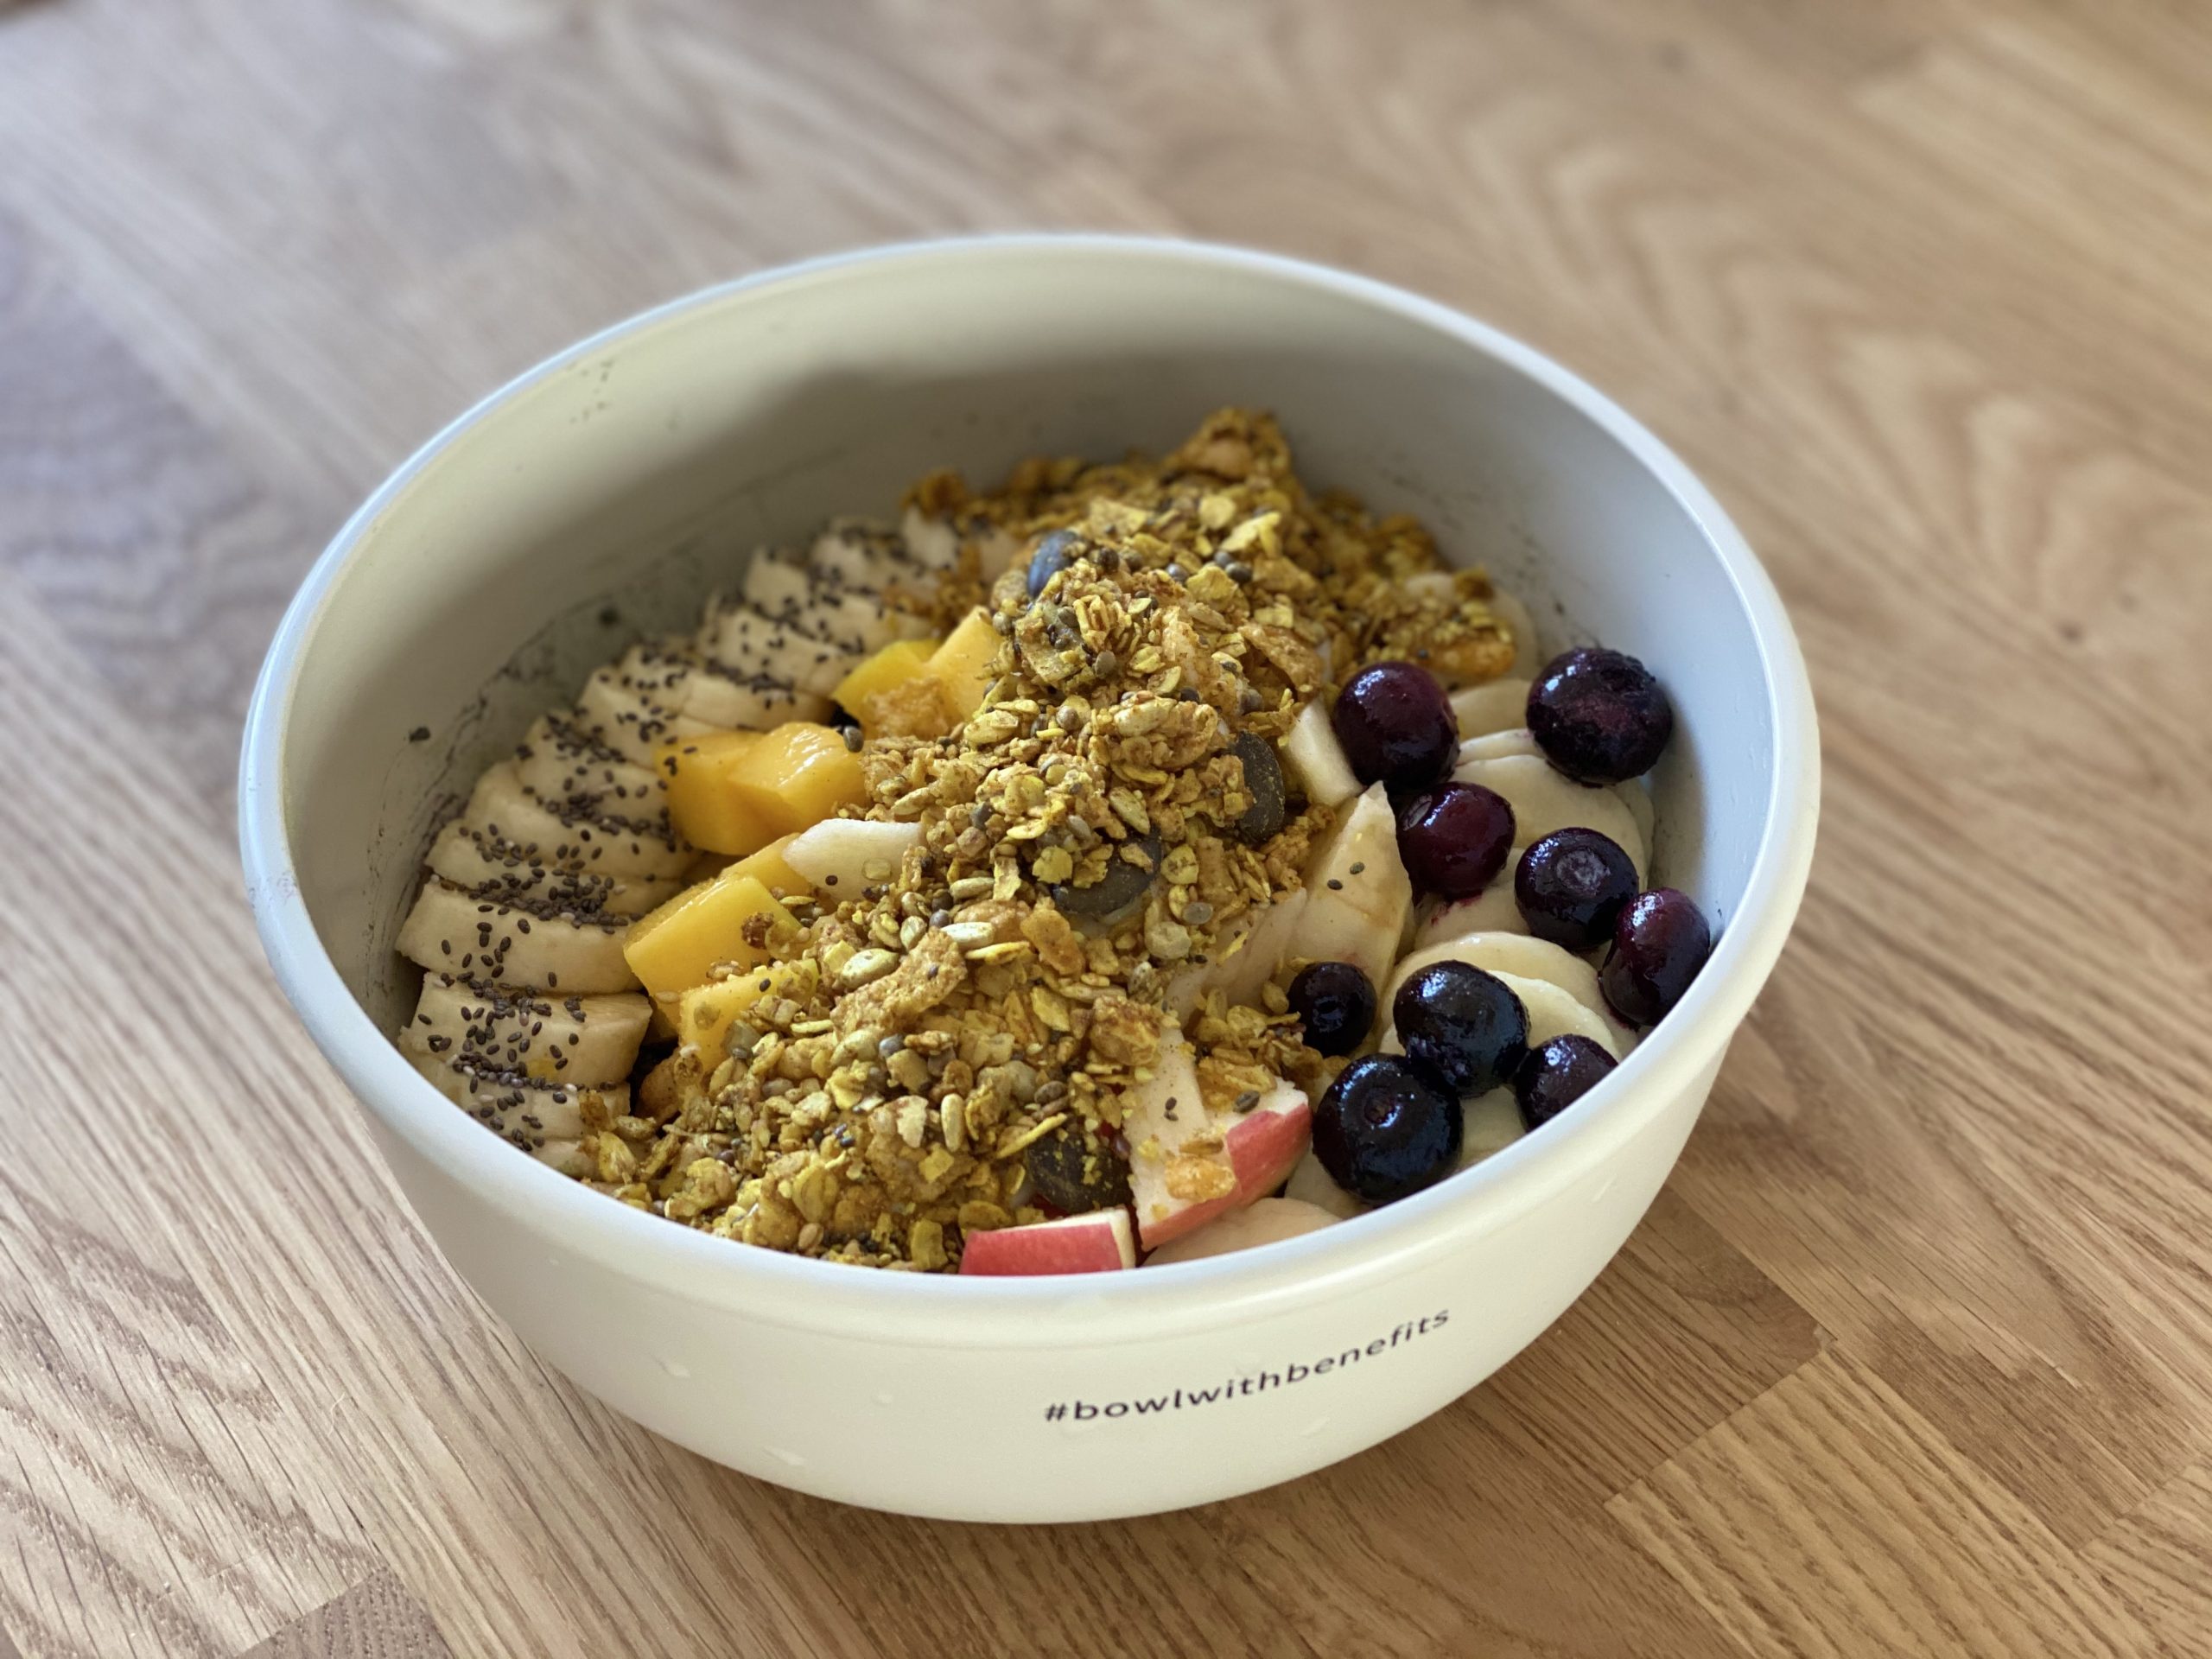 Close-up of a VYTAL bowl with cereal and fruit in it.